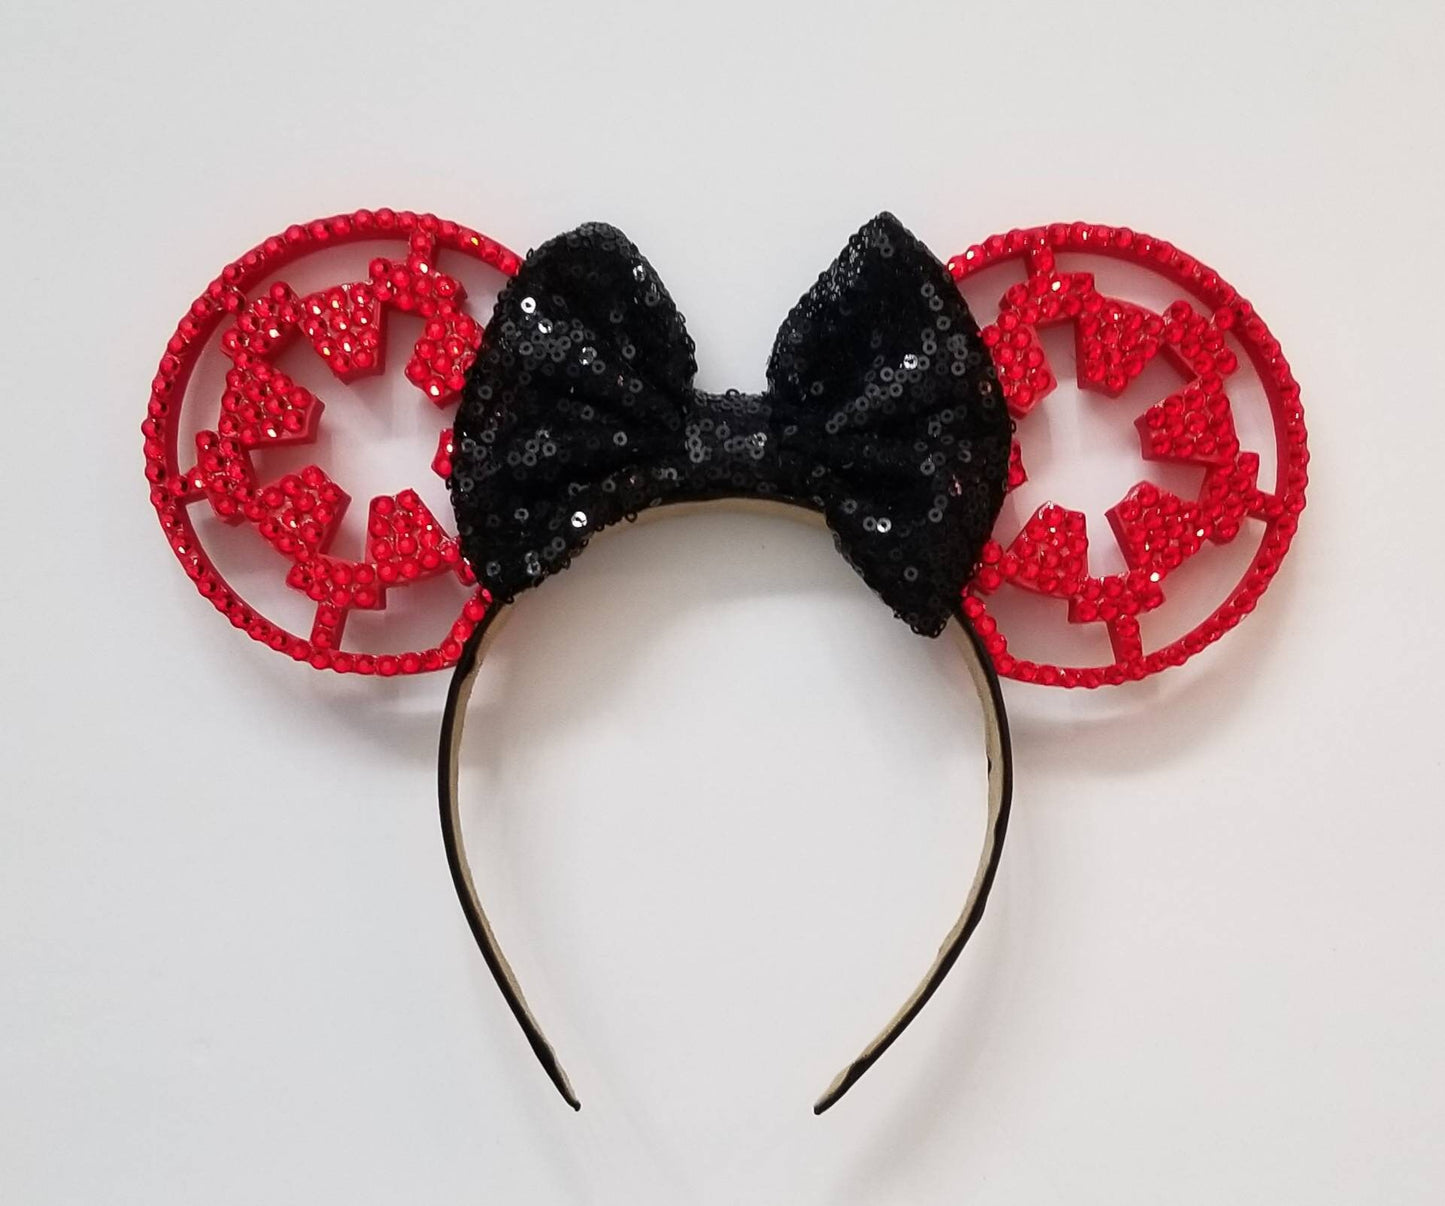 GALACTIC EMPIRE, Star Wars inspired 3D Mouse Ears with or without bow many color options